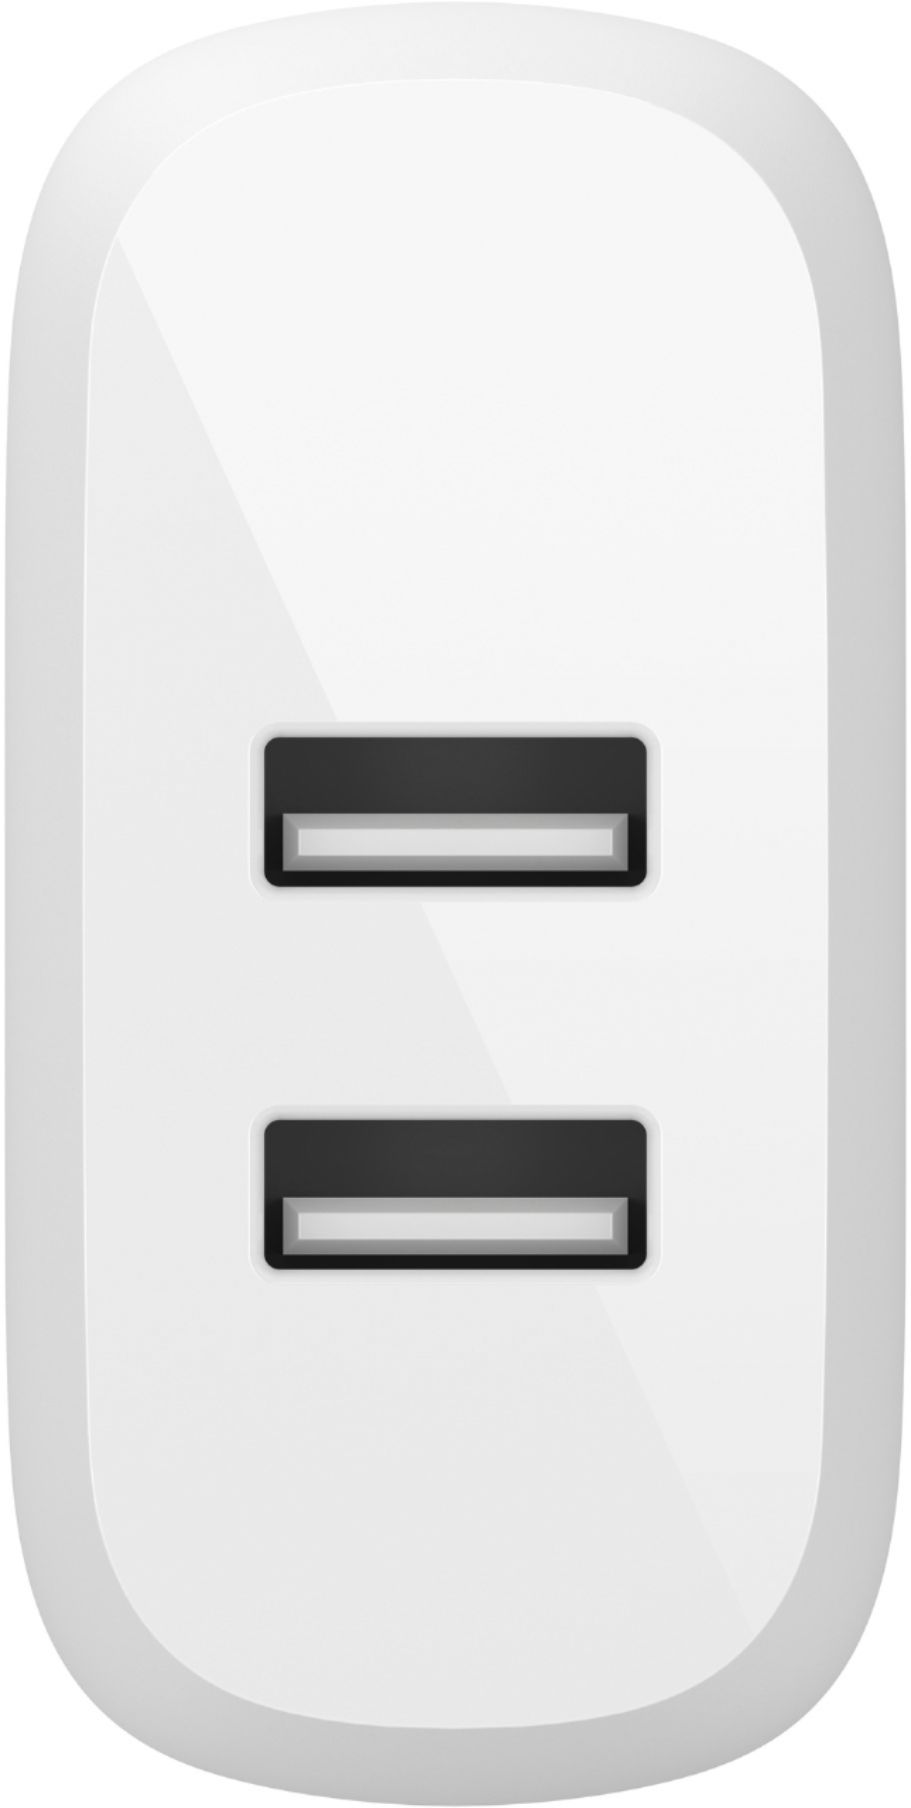 Dual USB-A Wall Charger (24W)